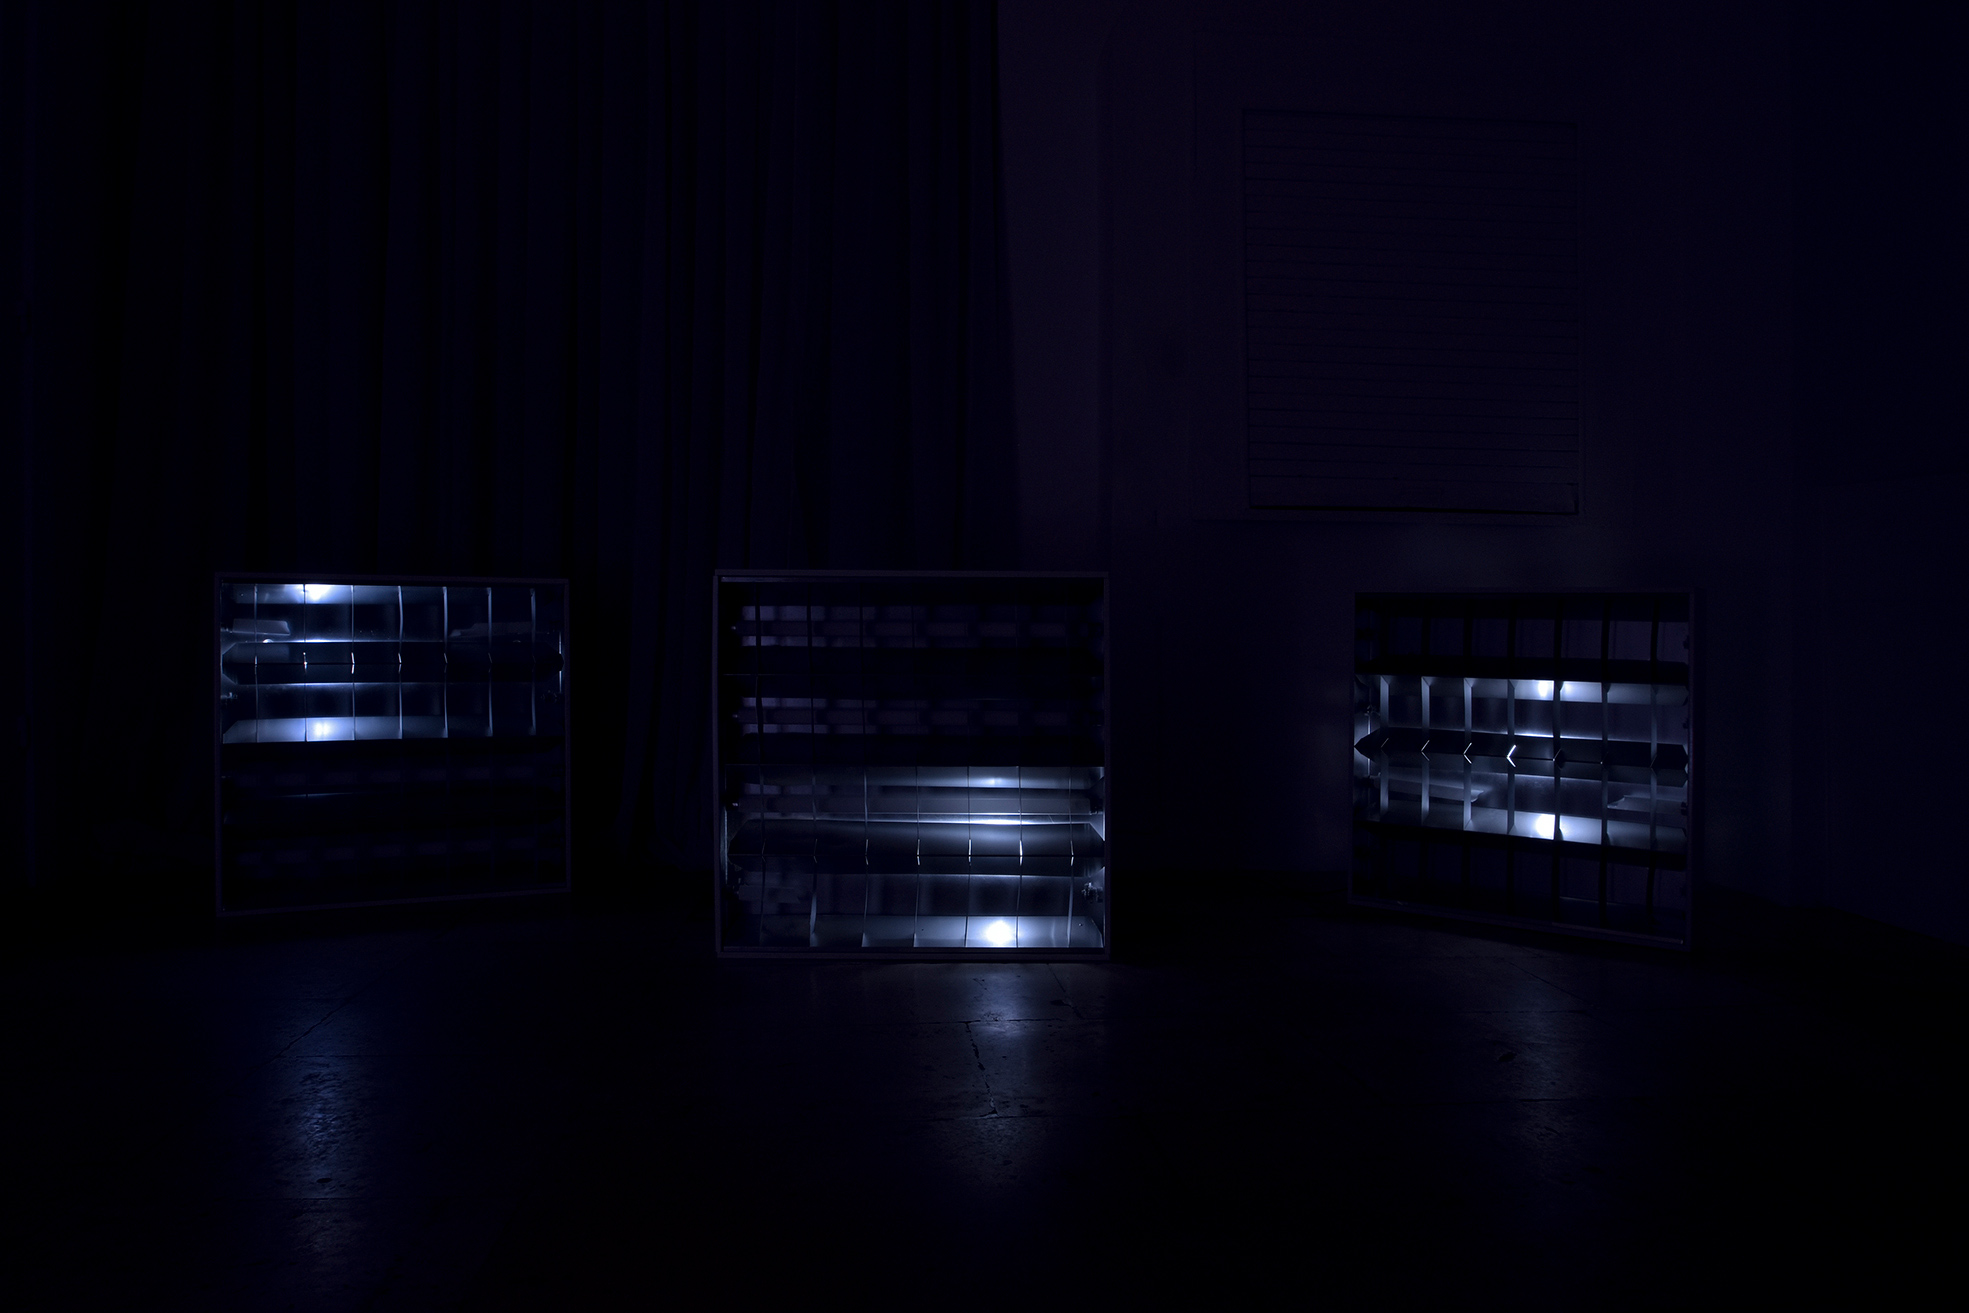 Claude Eigan, Under C-level, Ceiling lights boxes, broken neons, LED ‘breathing’ lights. Dimensions variables, size of each box : 62 x 62 x 10 cm, 2016.